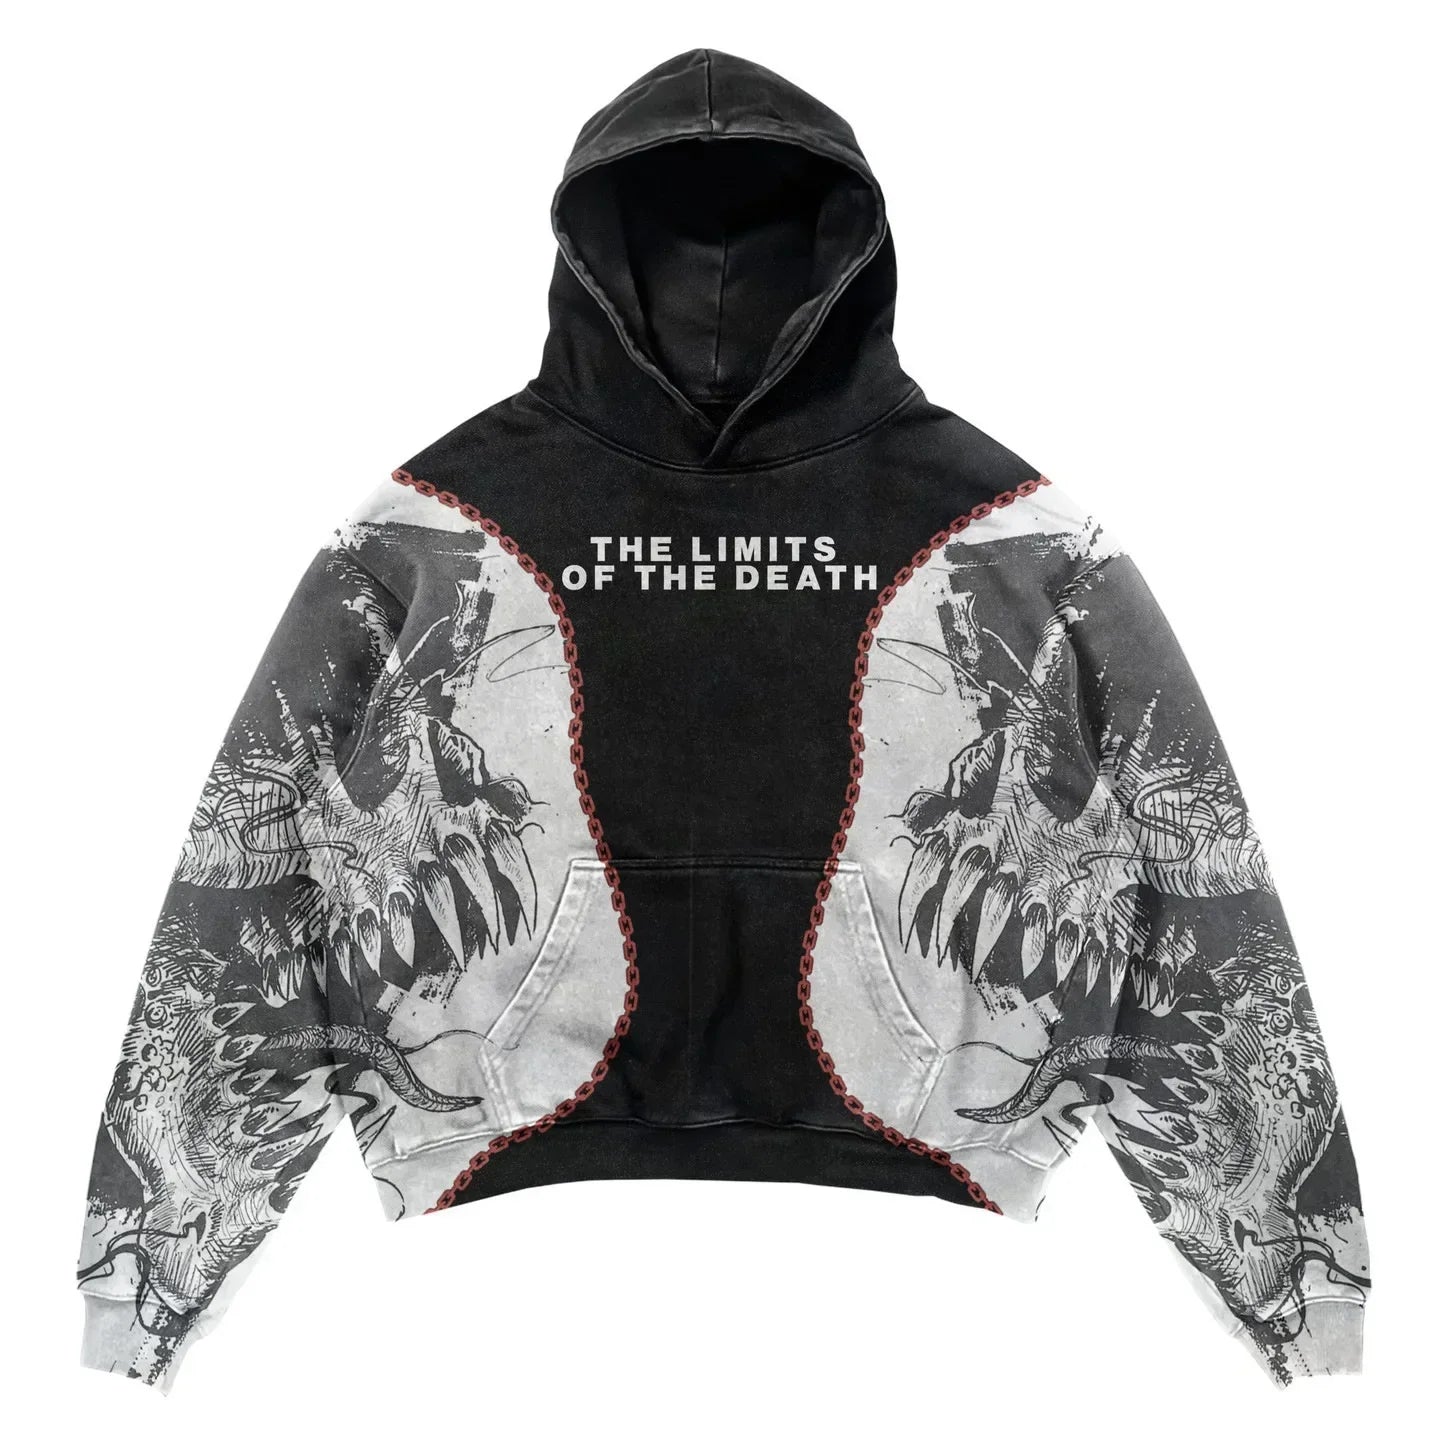 Black and gray Explosions Printed Skull Y2K Retro Hooded Sweater Coat Street Style Gothic Casual Fashion Hooded Sweater Men's Female with artistic skeletal designs on the sleeves and a front text reading "THE LIMITS OF THE DEATH" by Maramalive™. Perfect for those who appreciate punk style in men's fashion.